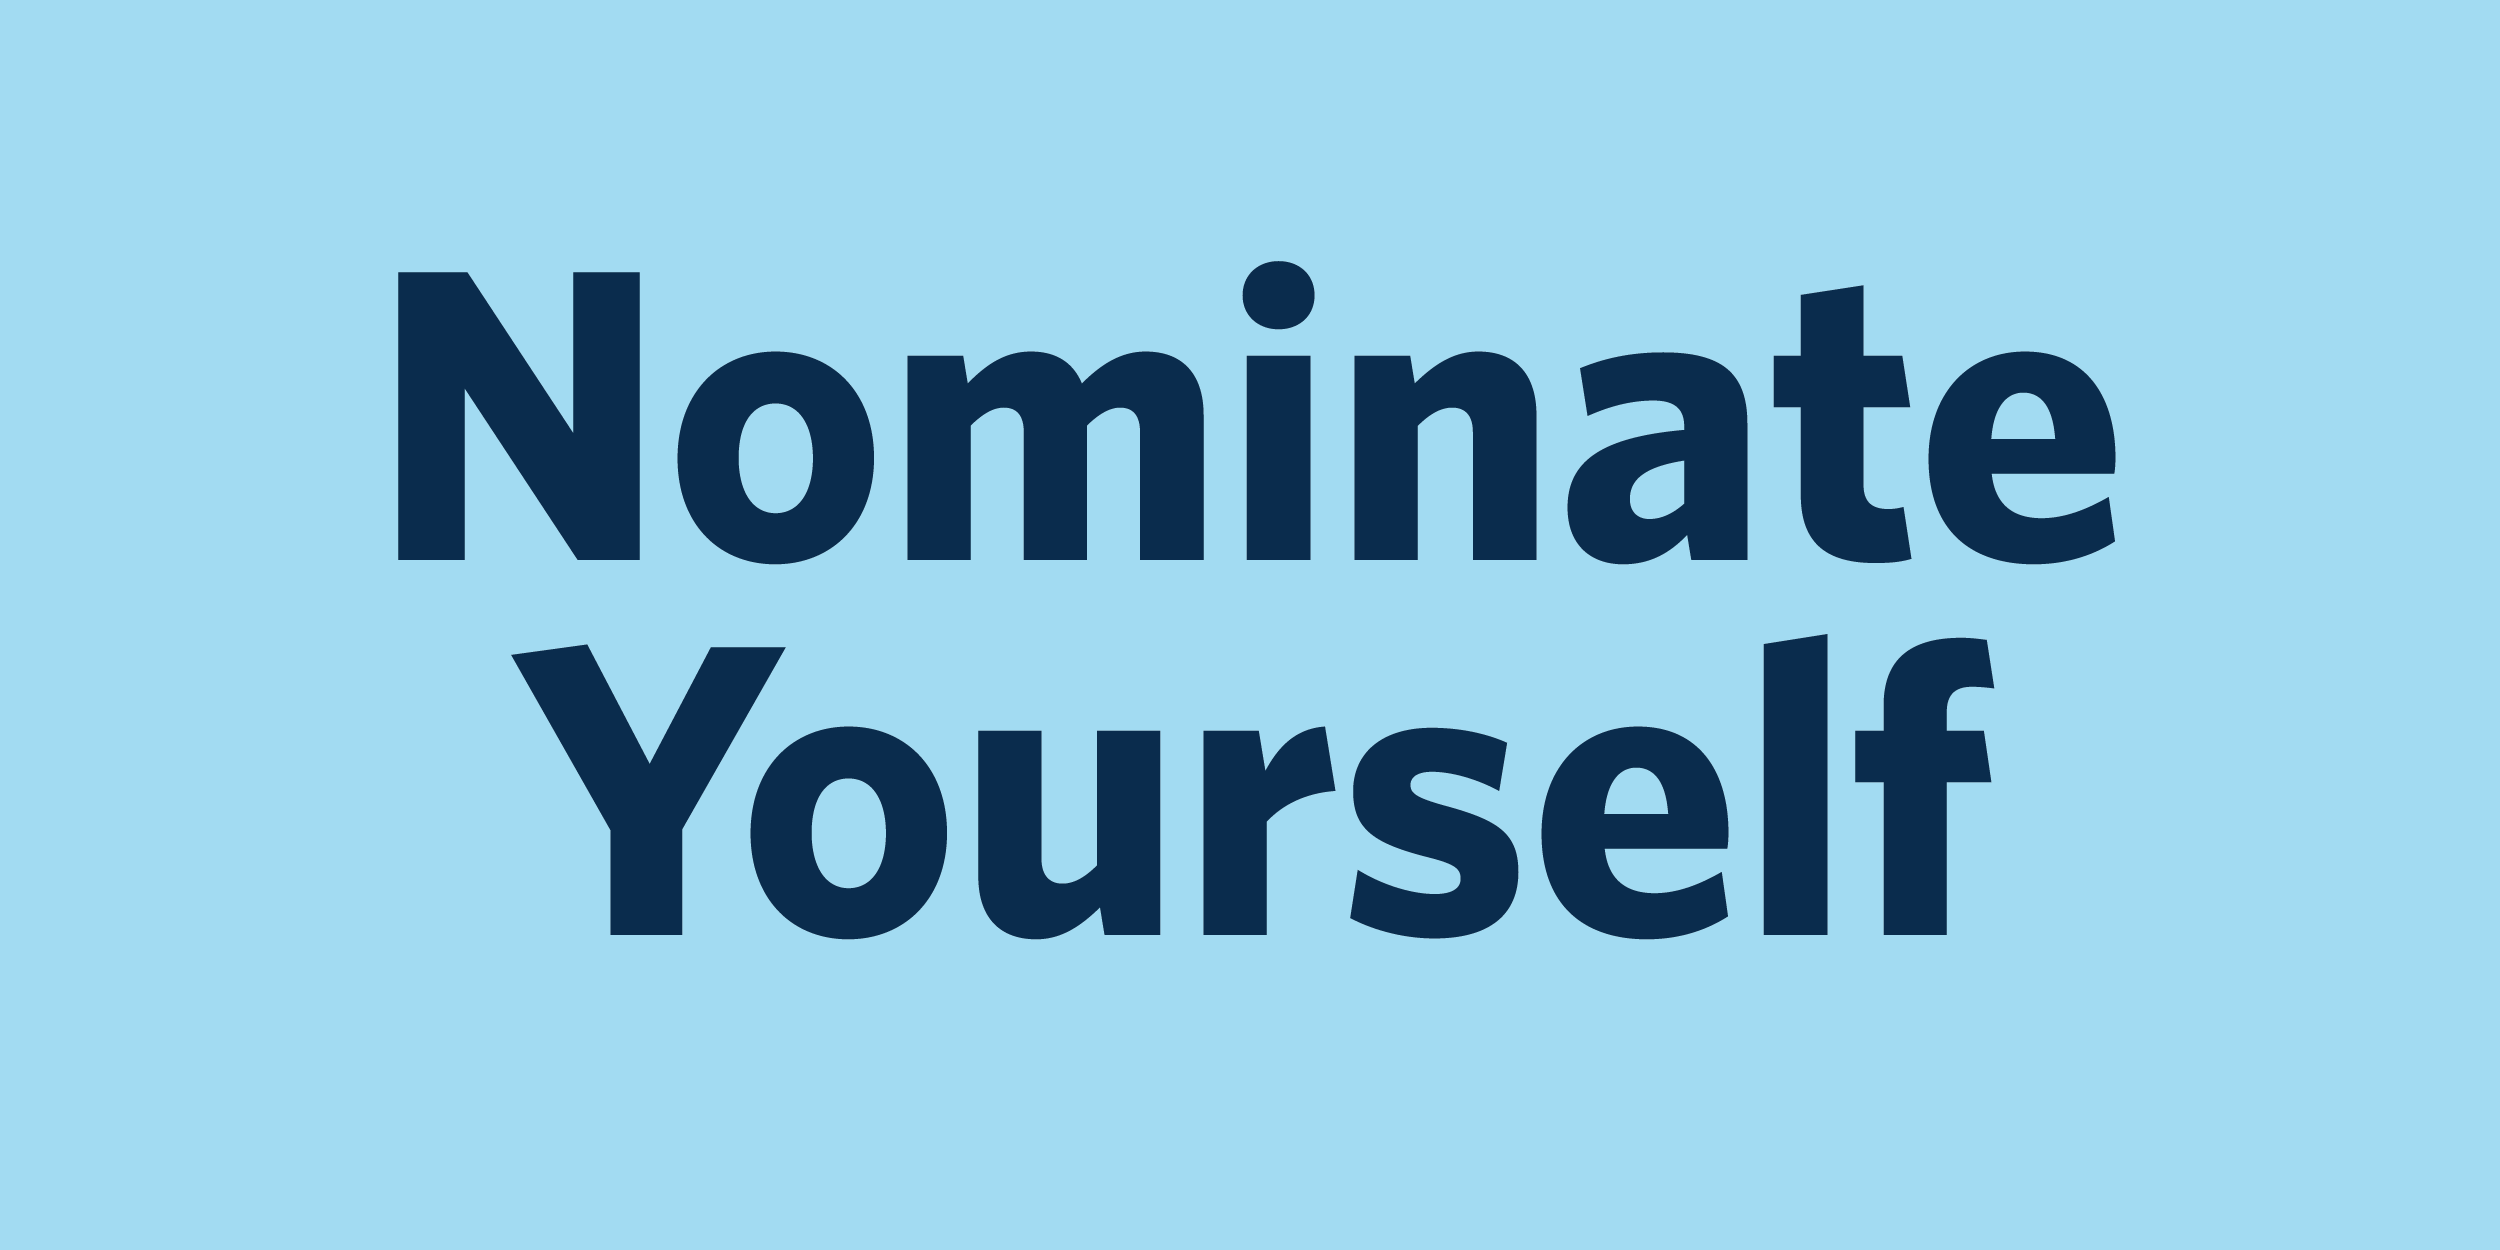 Nominate Yourself